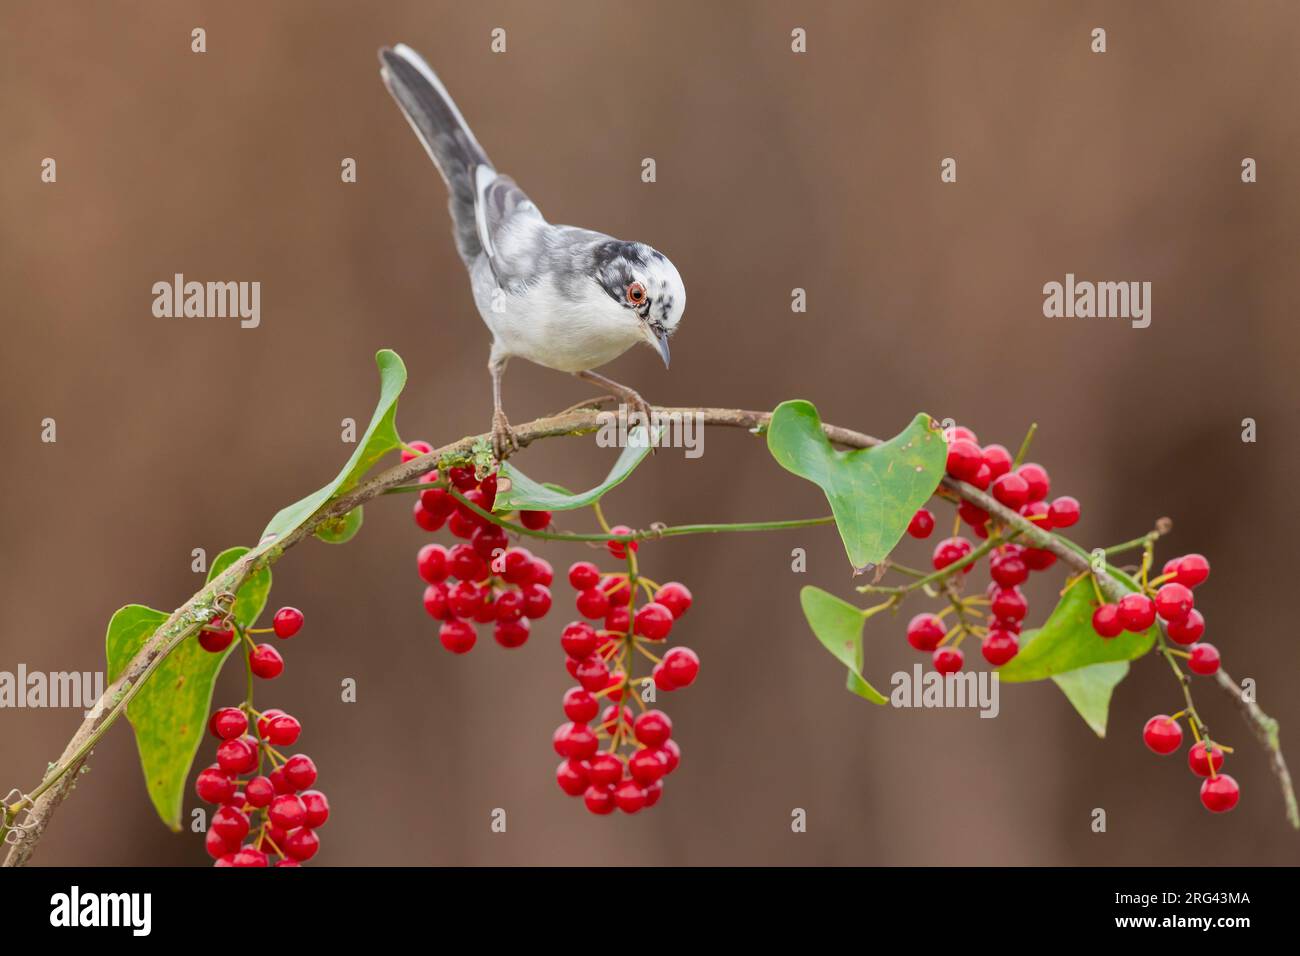 Sardinian Warbler (Sylvia melanocephala), side view of an adult male perched on a Common Smilax with berries, Campania, Italy Stock Photo